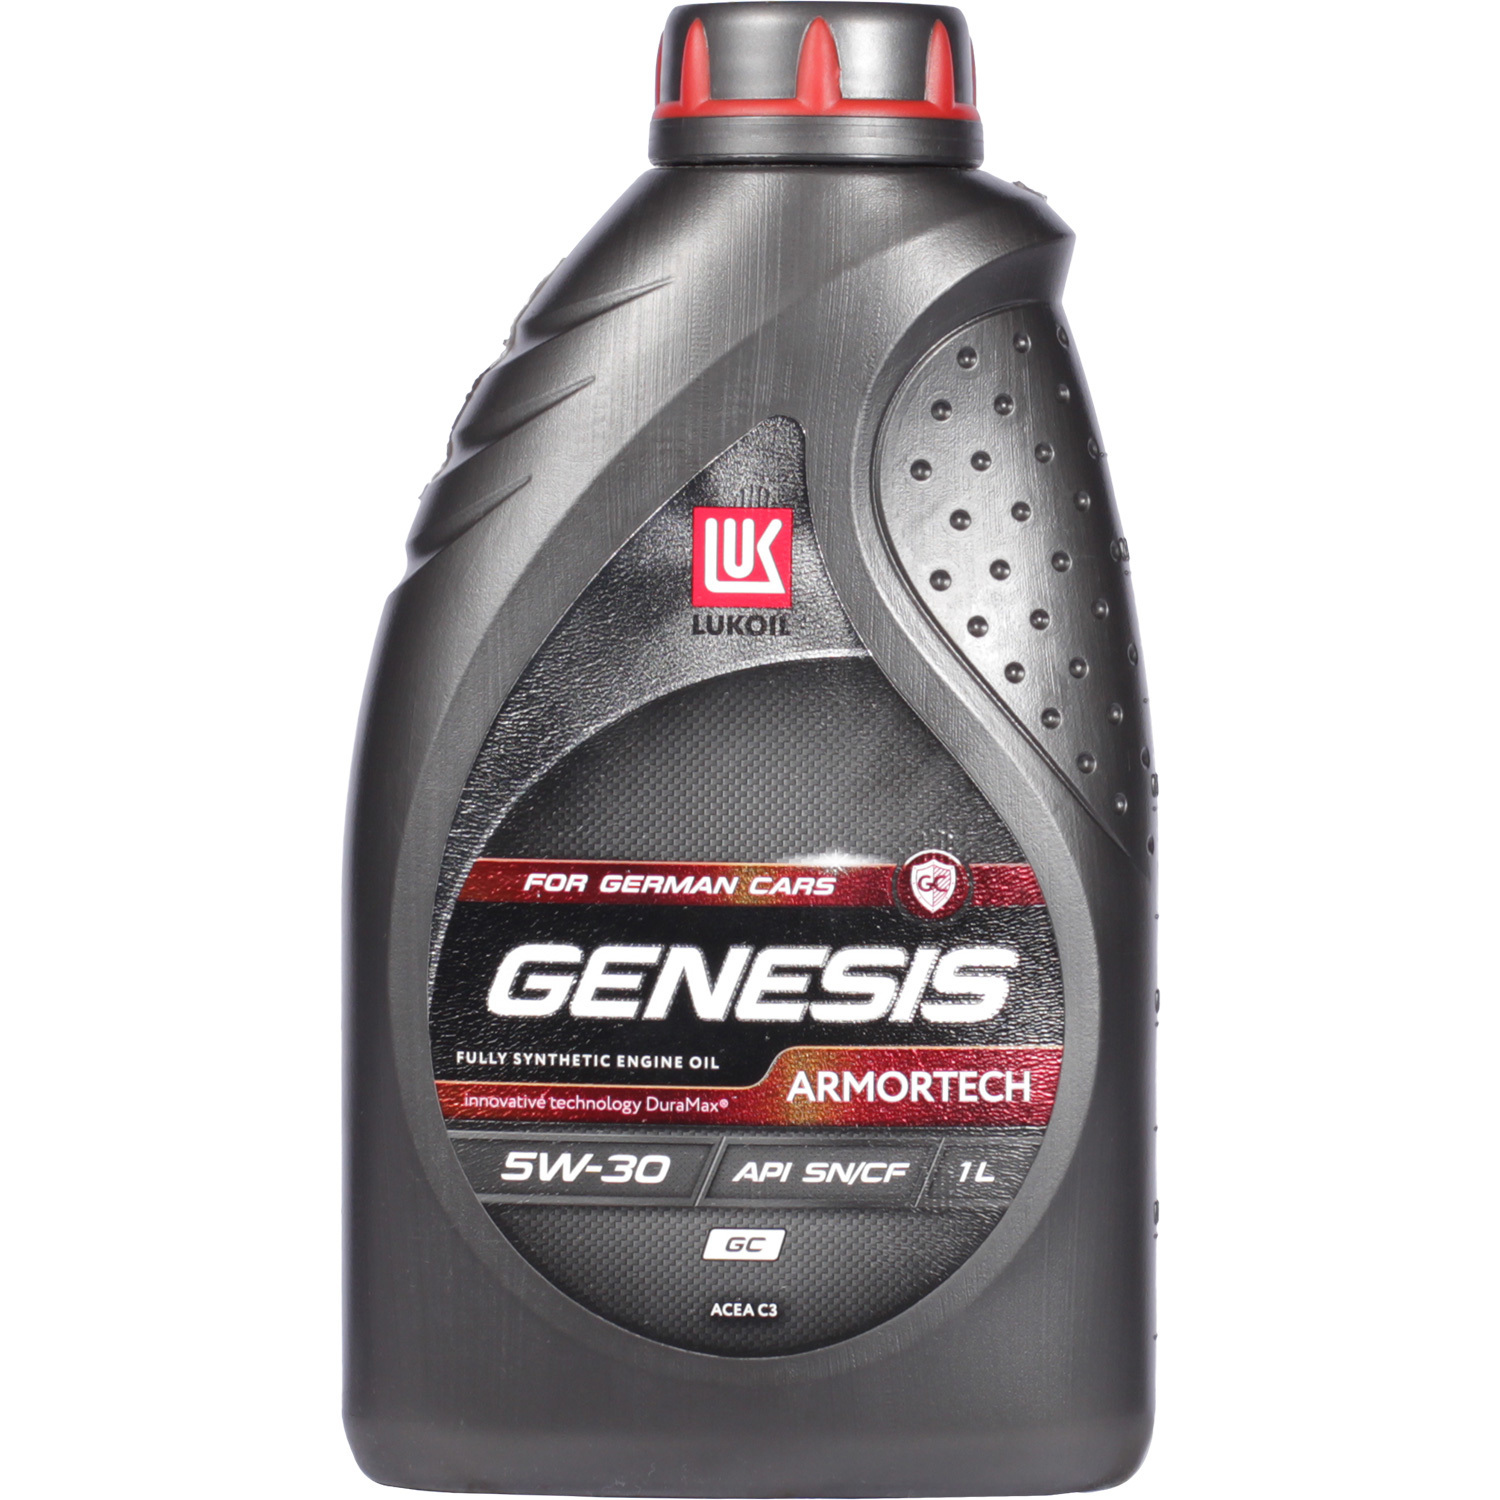 Lukoil Моторное масло Lukoil Genesis Armortech GC 5W-30, 1 л lukoil моторное масло lukoil genesis armortech jp 5w 30 4 л